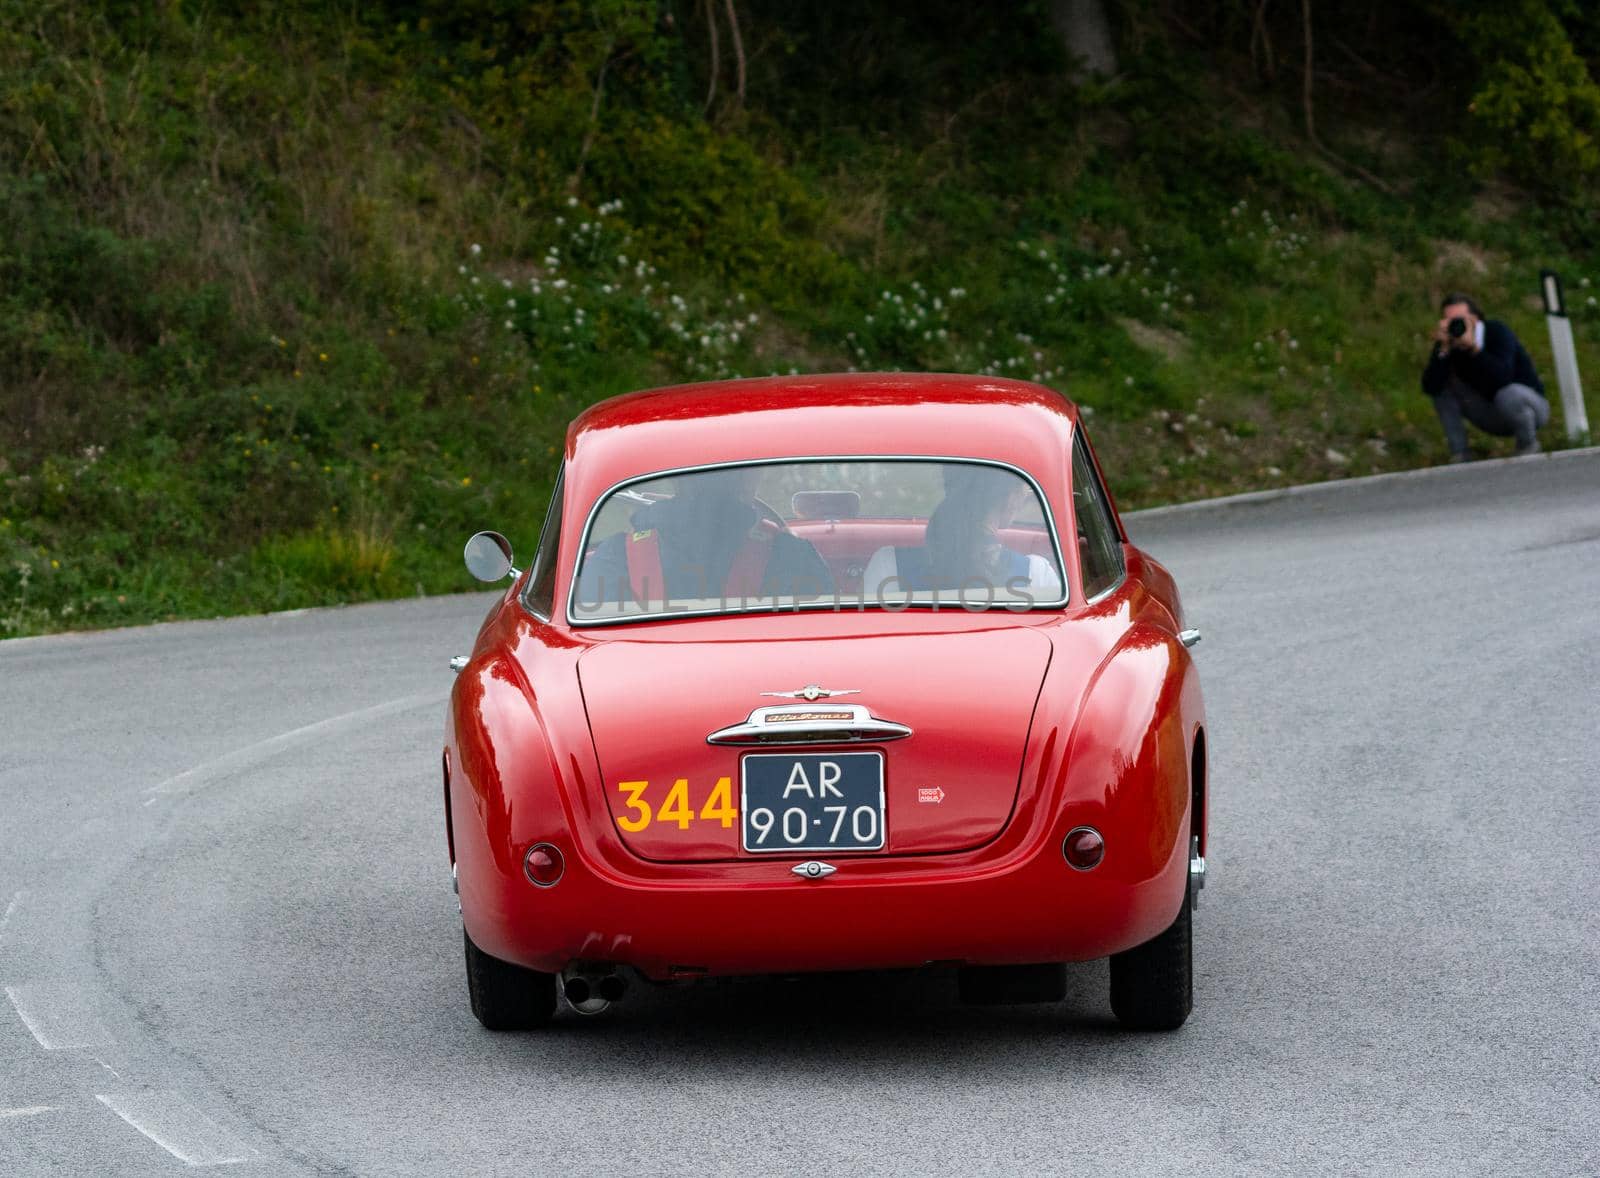 CAGLI , ITALY - OTT 24 - 2020 : ALFA ROMEO 1900 C SUPER SPRINT TOURING 1955 on an old racing car in rally Mille Miglia 2020 the famous italian historical race (1927-1957)